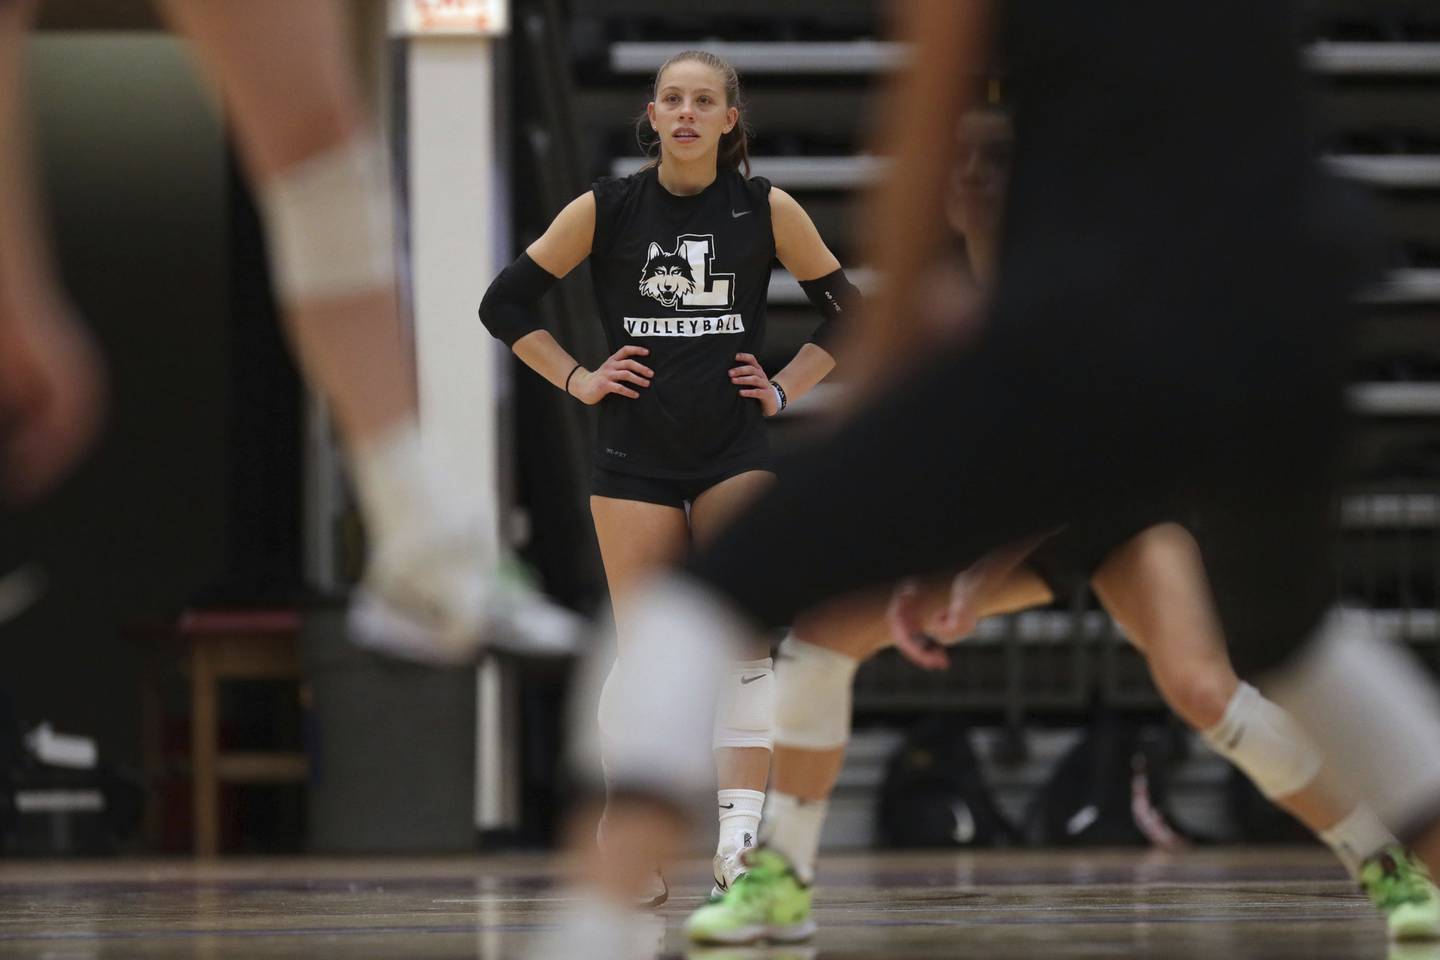 Loyola University Chicago volleyball player Grace Hinchman watches practice at Gentile Arena on Oct. 18, 2022. Hinchman was diagnosed with a rare epilepsy condition called FIRES, febrile infection-related epilepsy syndrome. The condition affects about 1 in 1,000,000 people.